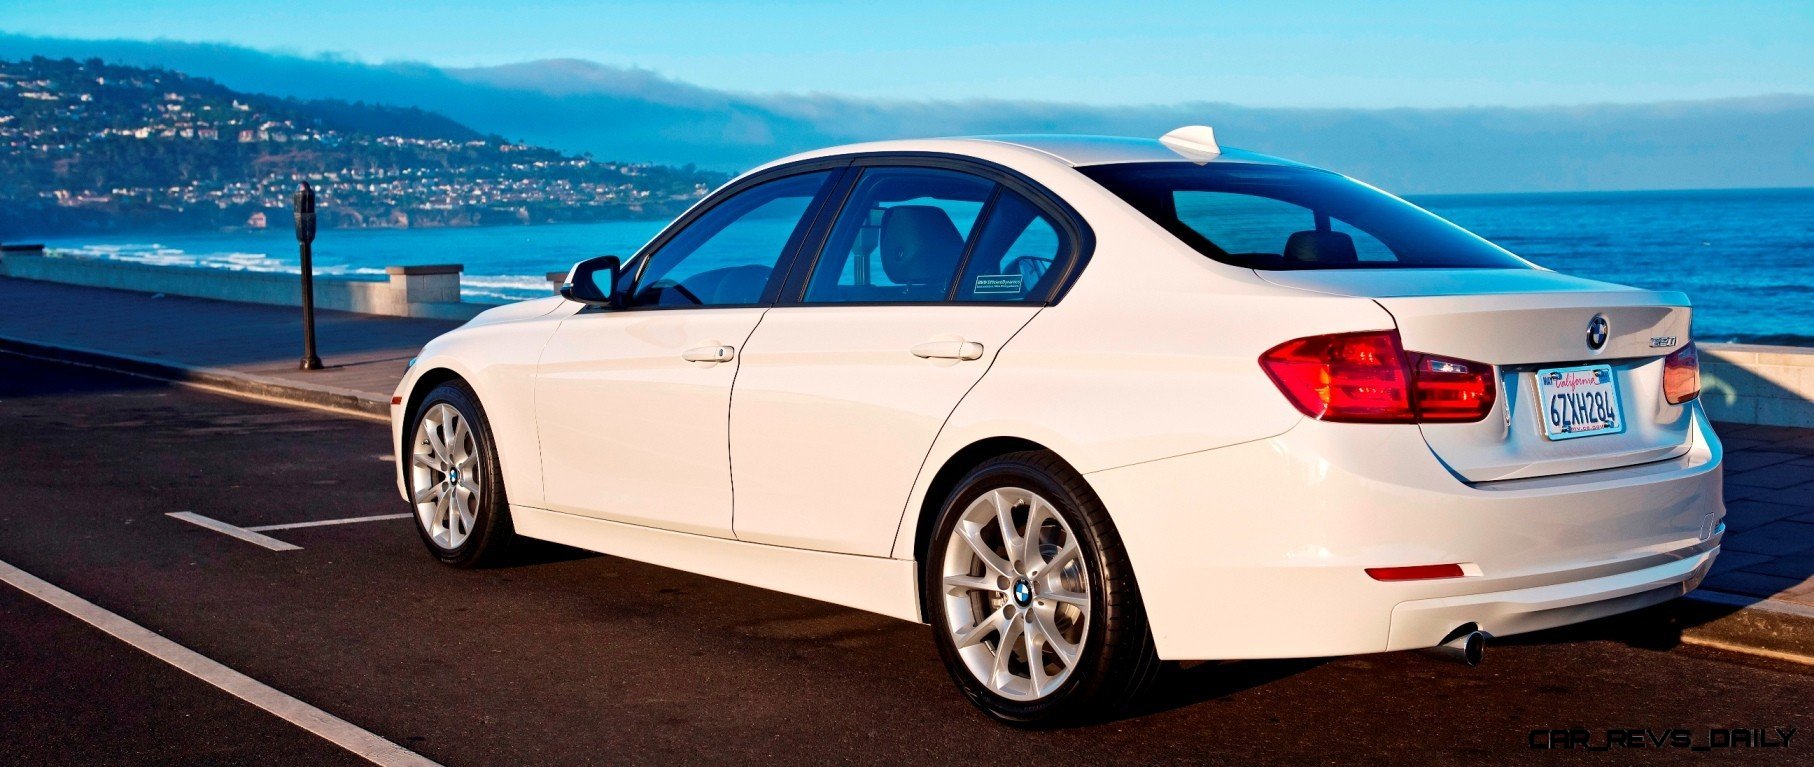 Buyers Guide -- 7.1s 2014 BMW 320i from $32,650 as 6-Sp Manual -- 8-Sp Auto  and AWD Versions Also Offered » Car-Revs-Daily.com